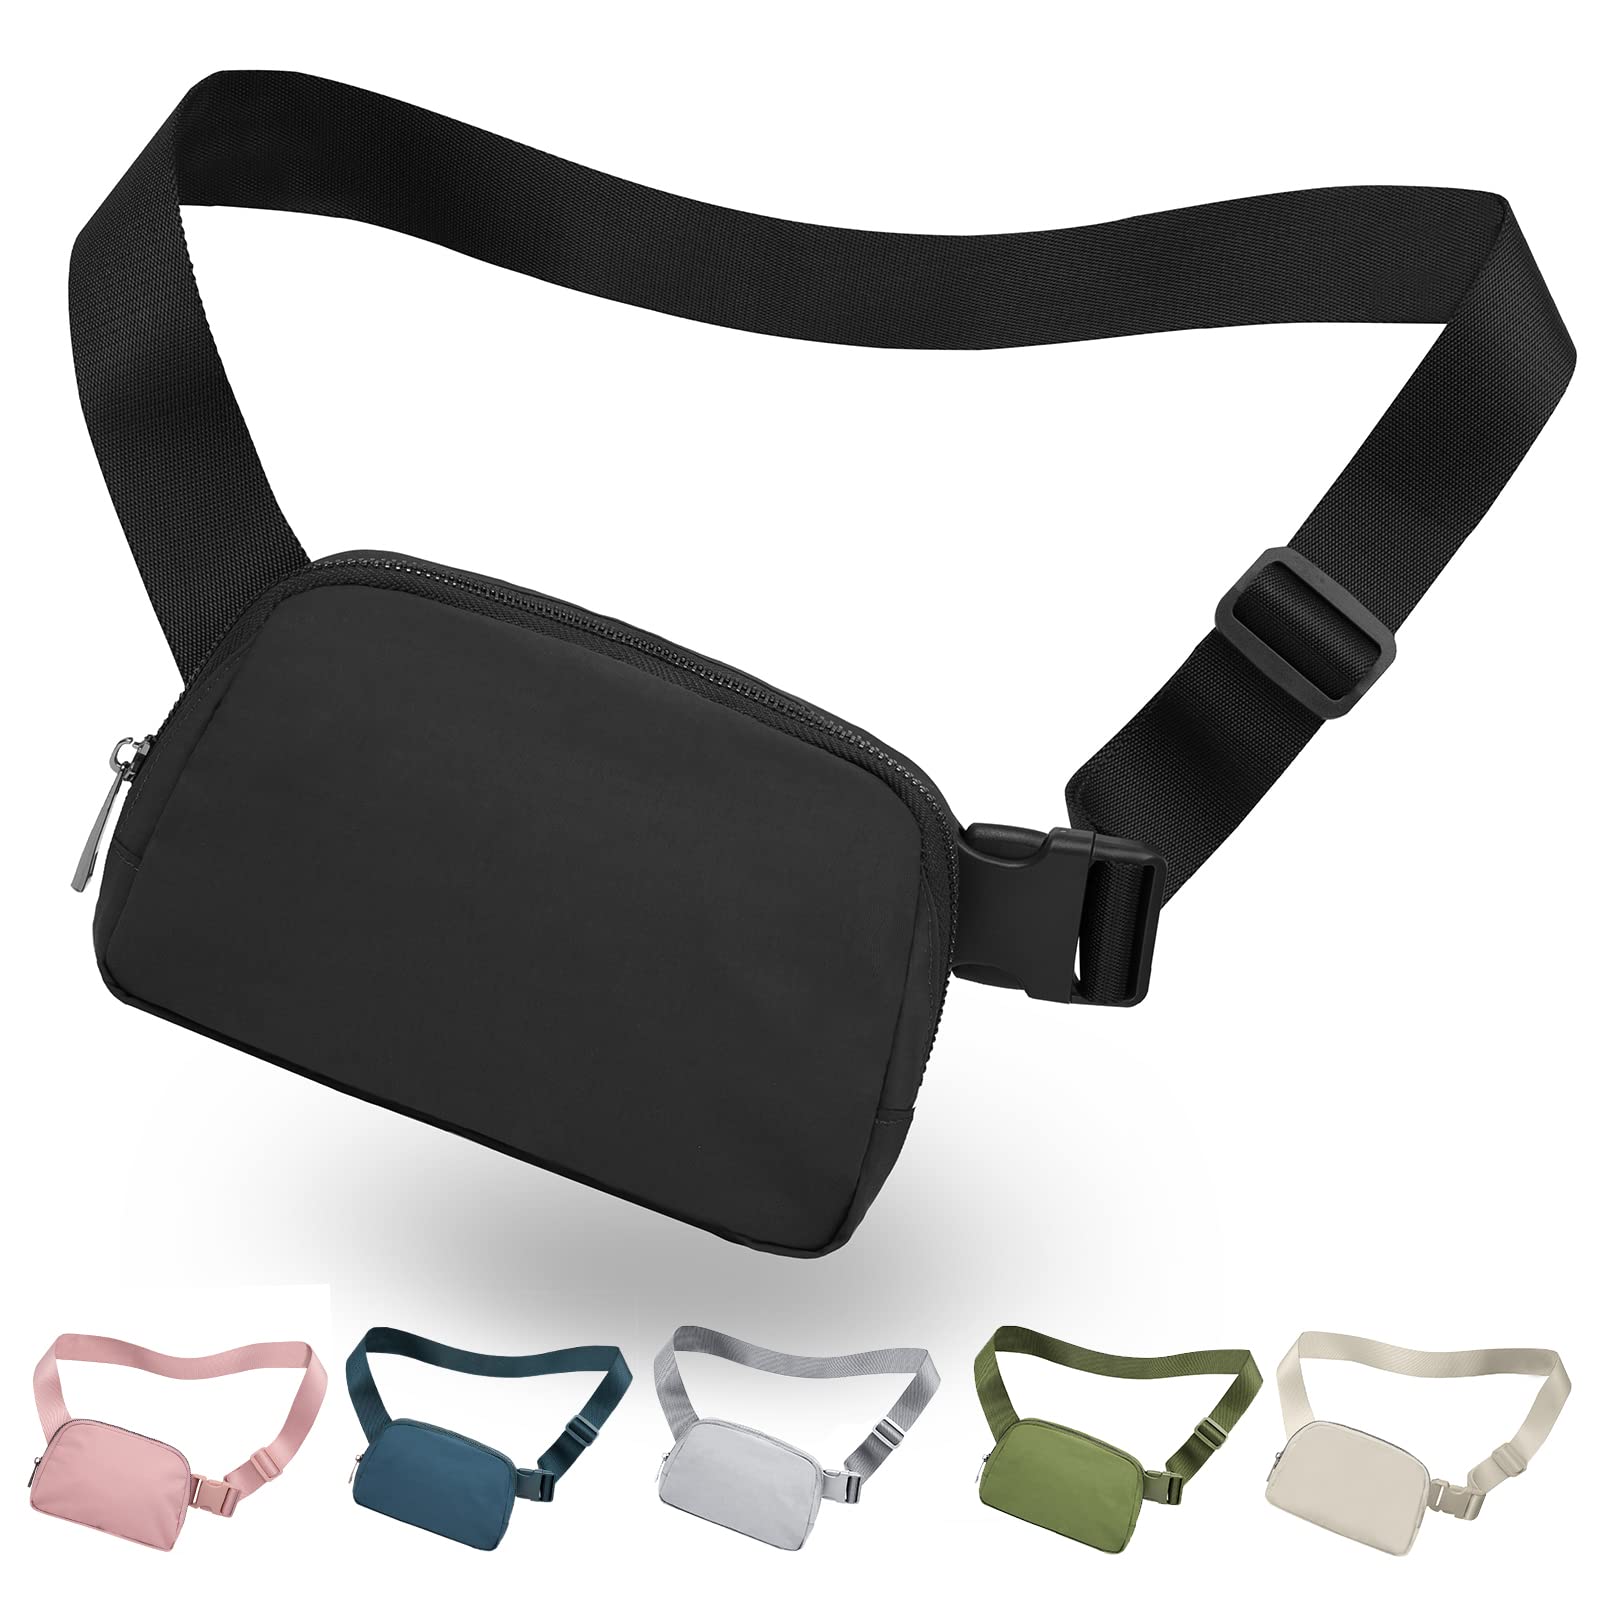 Seadamoo Mini Black Fanny Pack Crossbody Bags for Women and Men, Waterproof  Belt Bag with Adjustable Strap for Traveling Running Hiking Cycling.